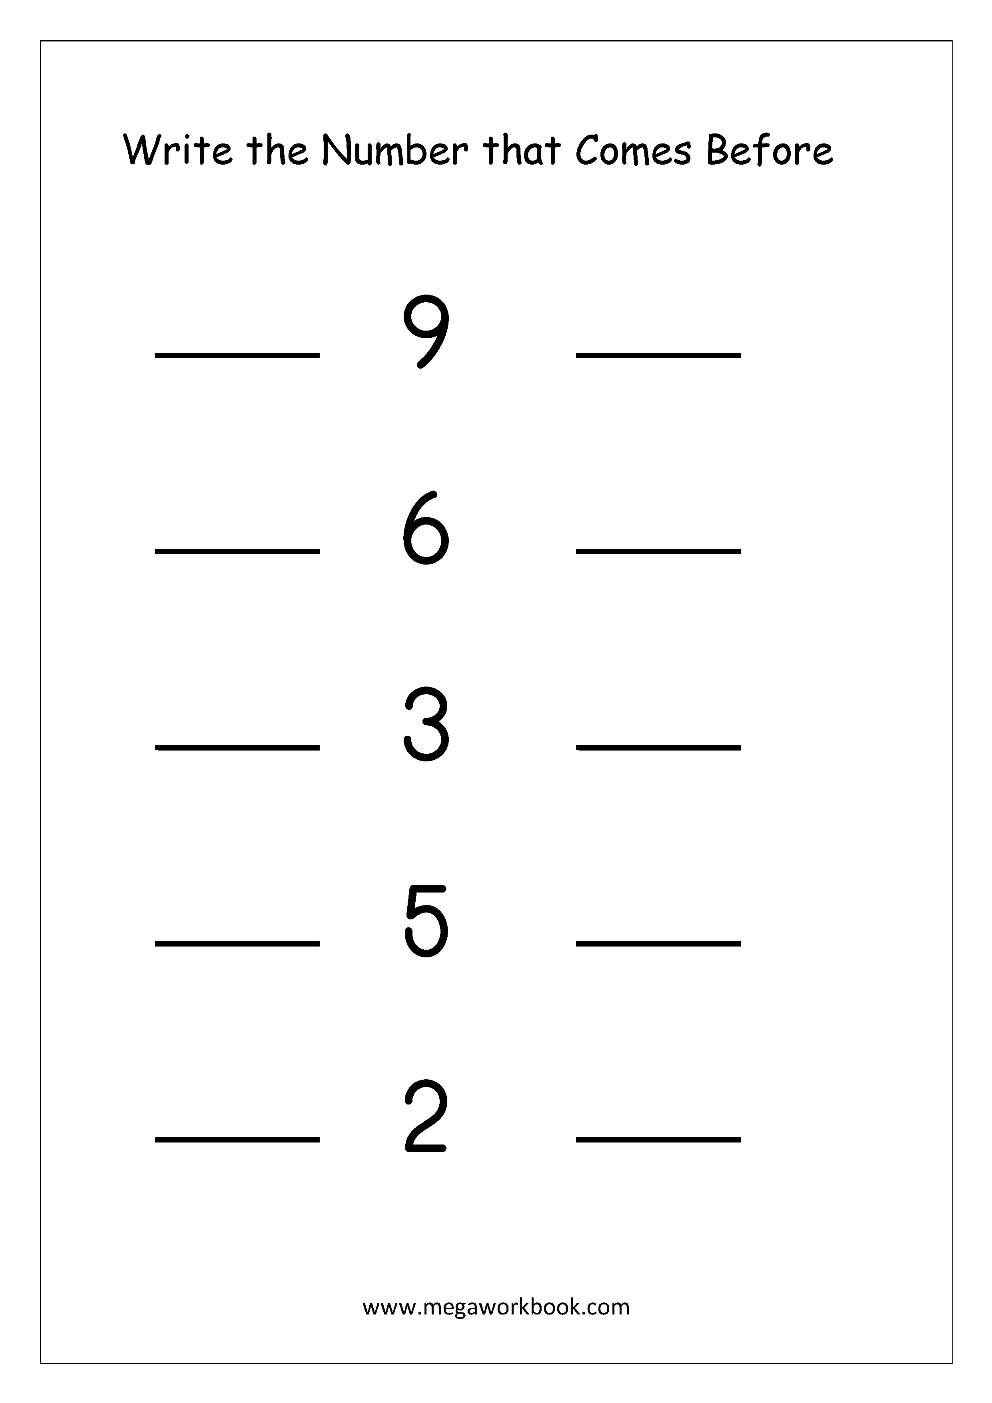 ordering-numbers-worksheets-missing-numbers-what-comes-before-and